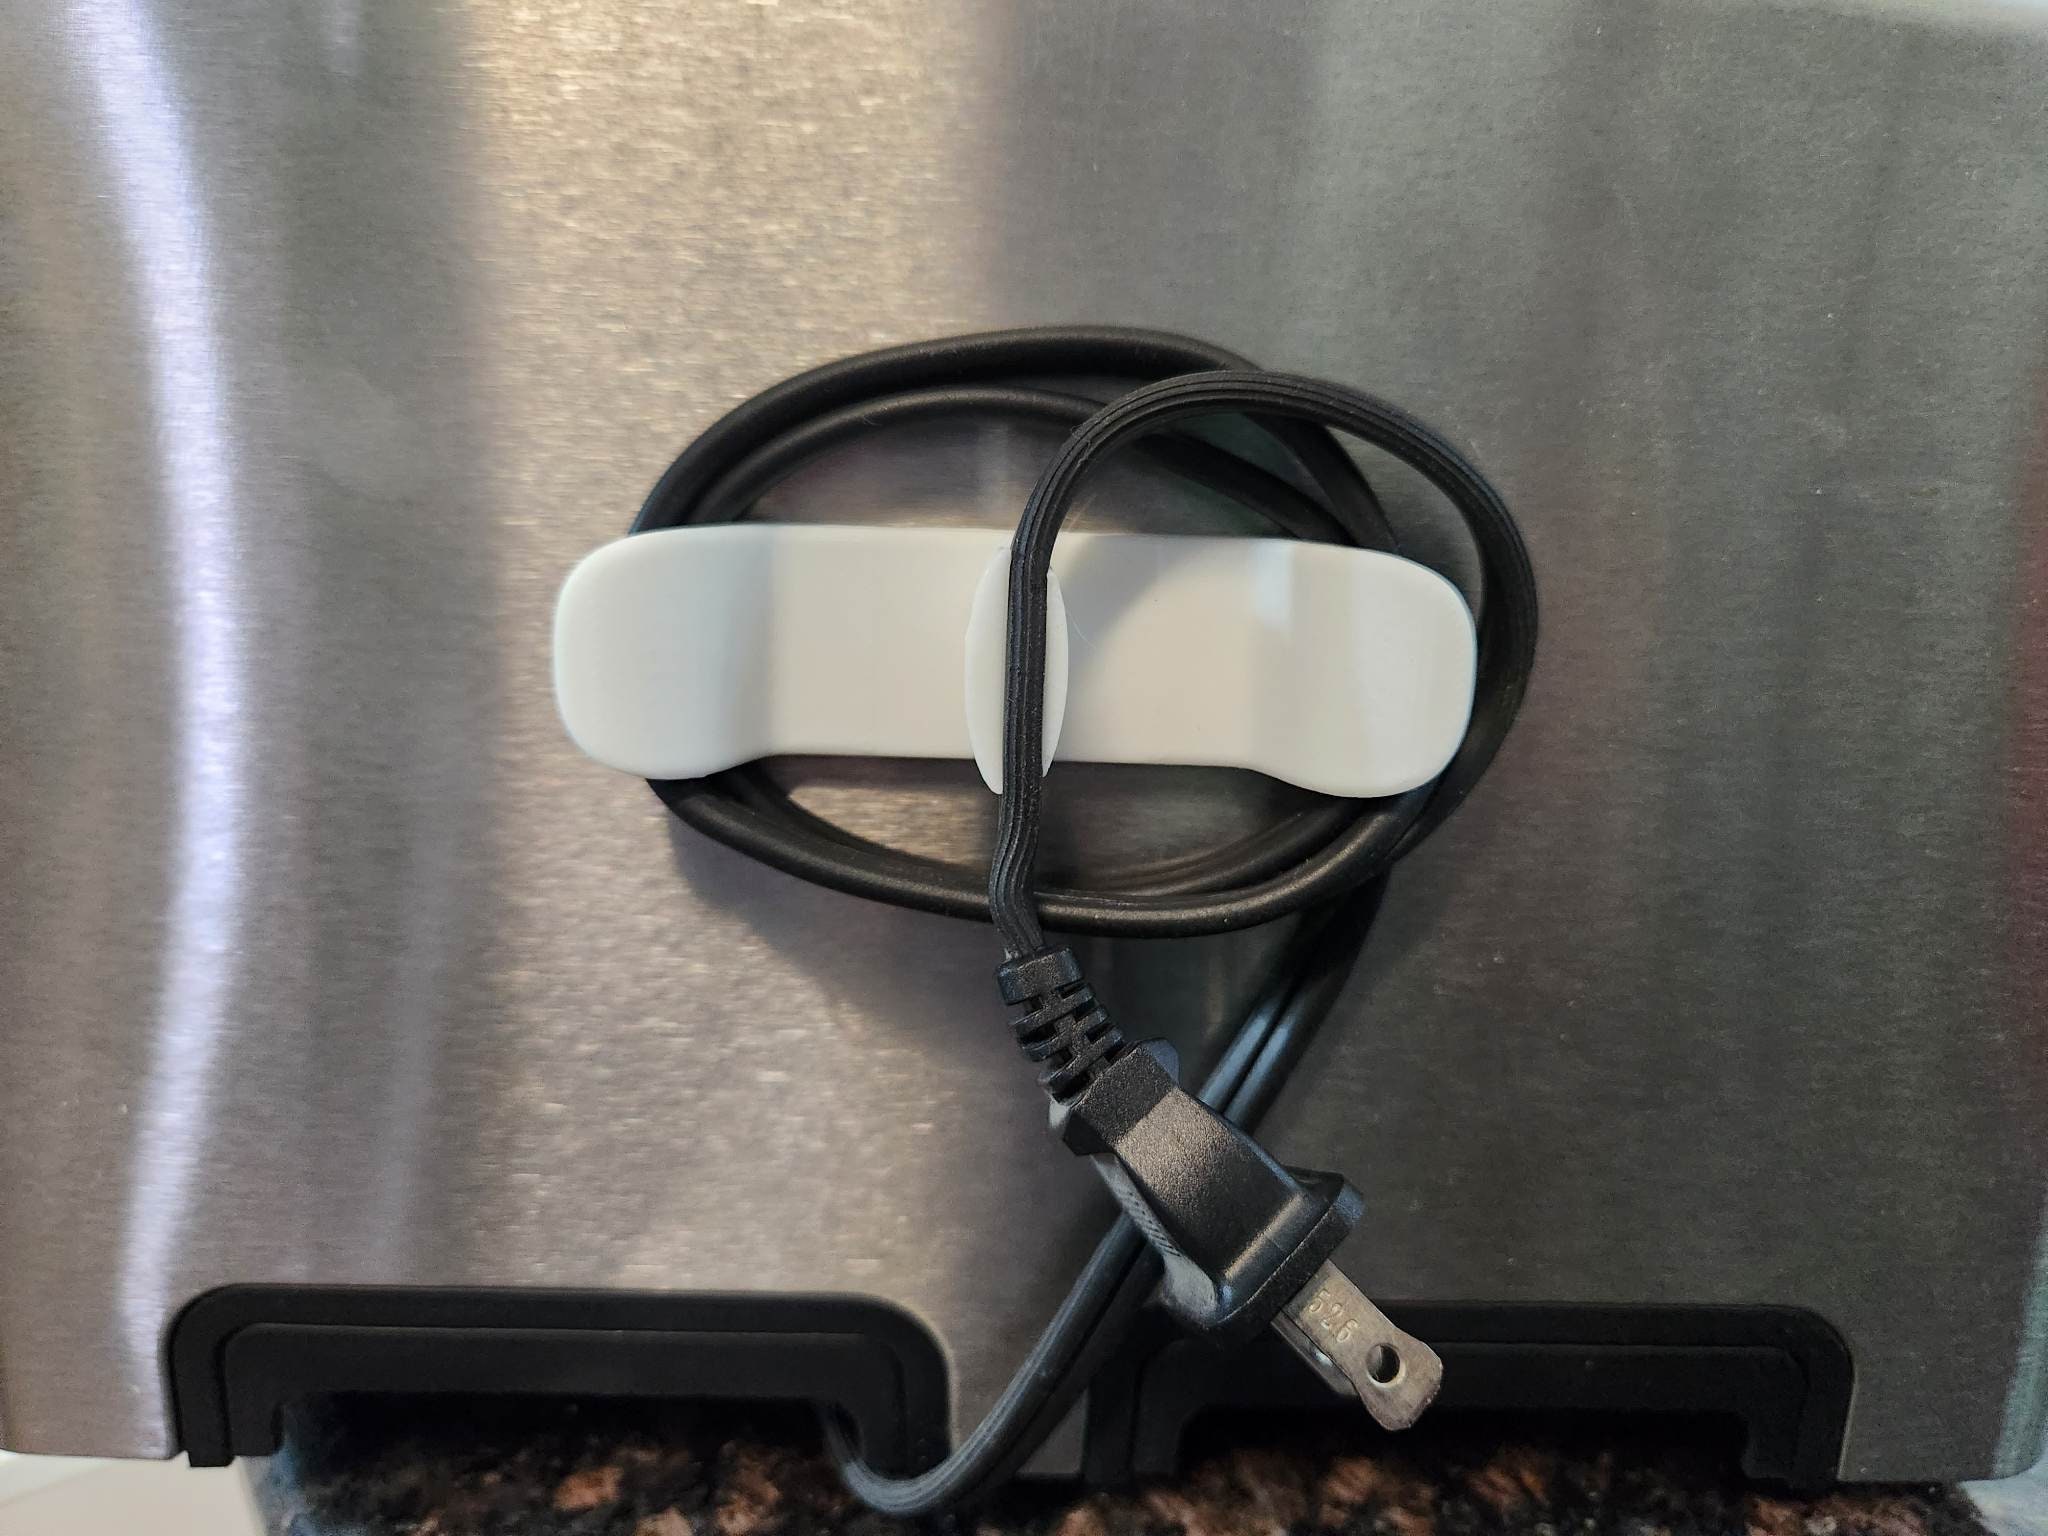 Kitchen Appliance Cord Wrap-black-gray-gray - Cables & Adapters